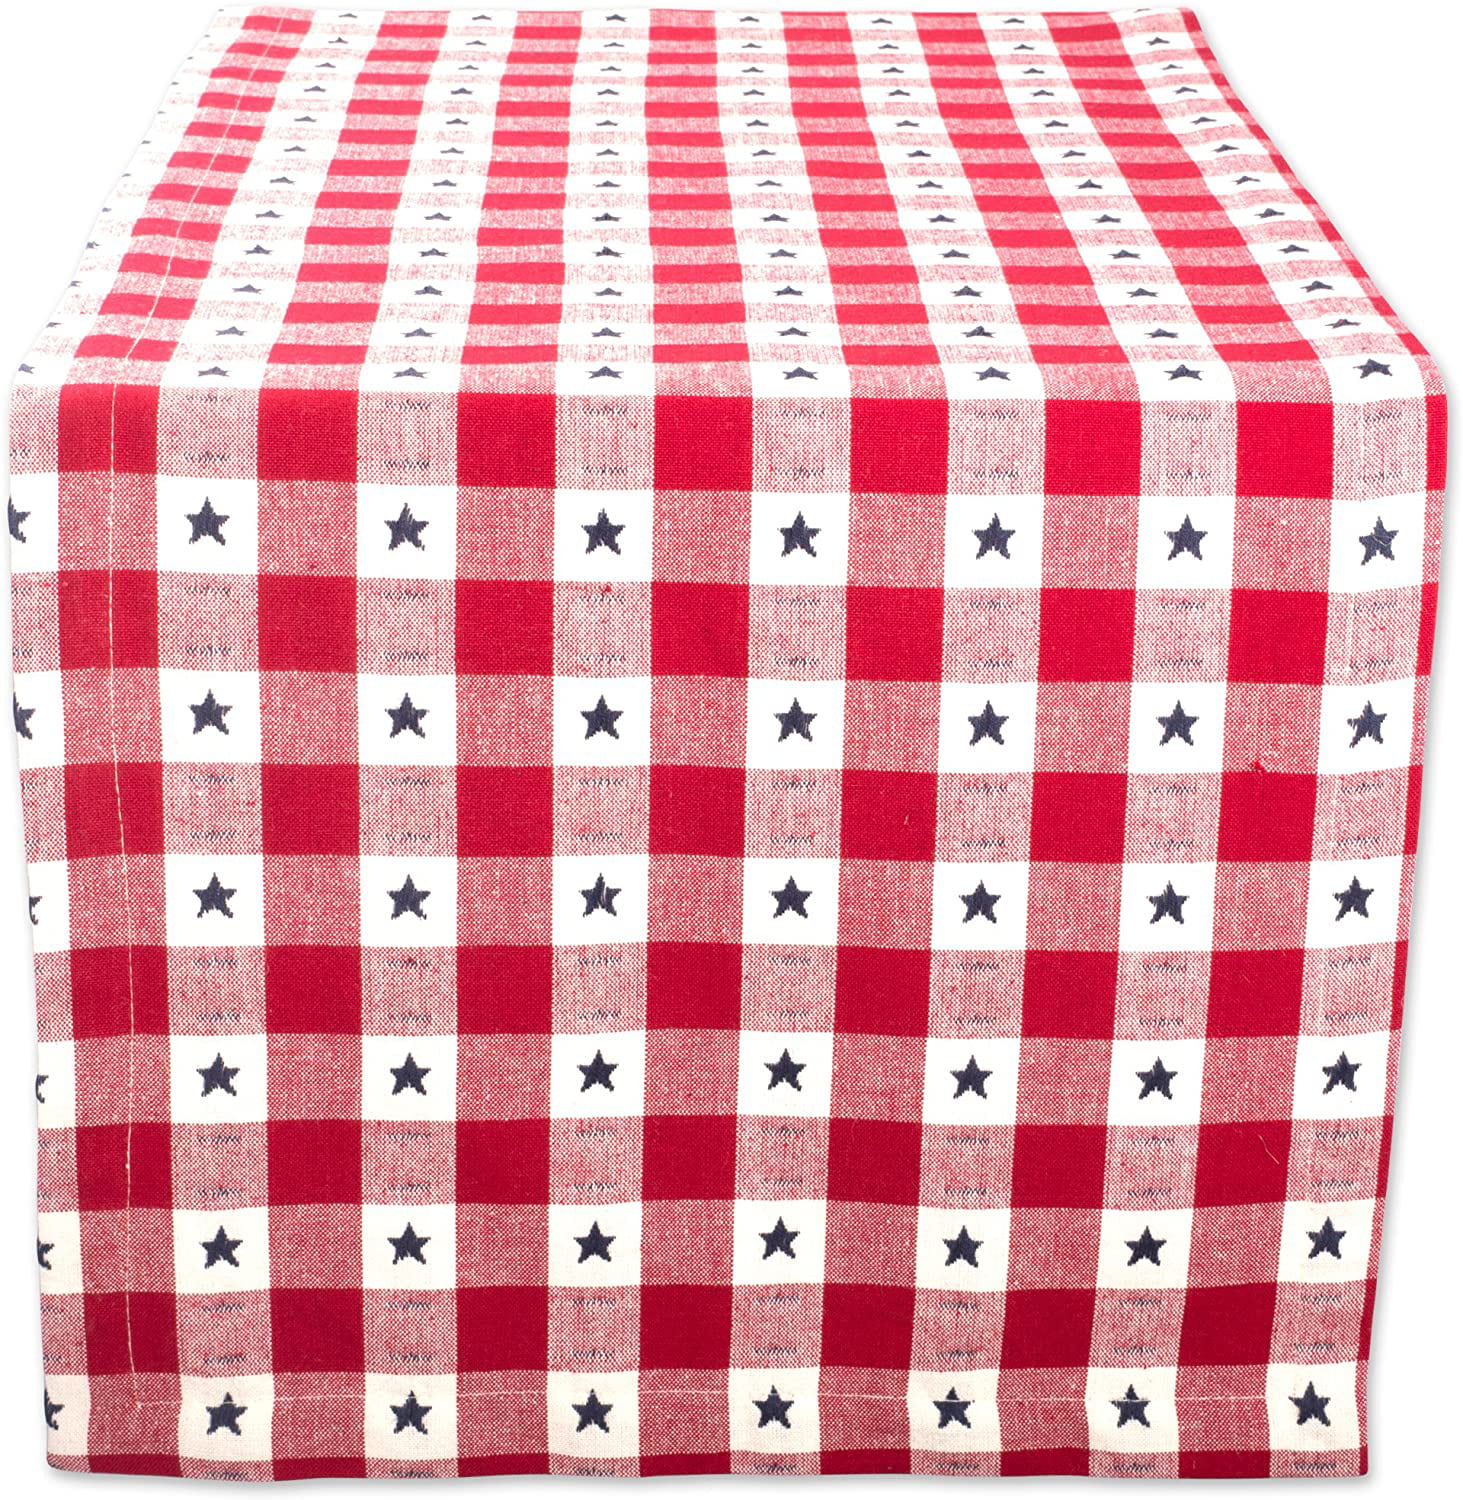 Summer BBQ and Outdoor Picnics -14x108 Red White and Blue Star Check DII Cotton Table Runner for Independence Day July 4th Party